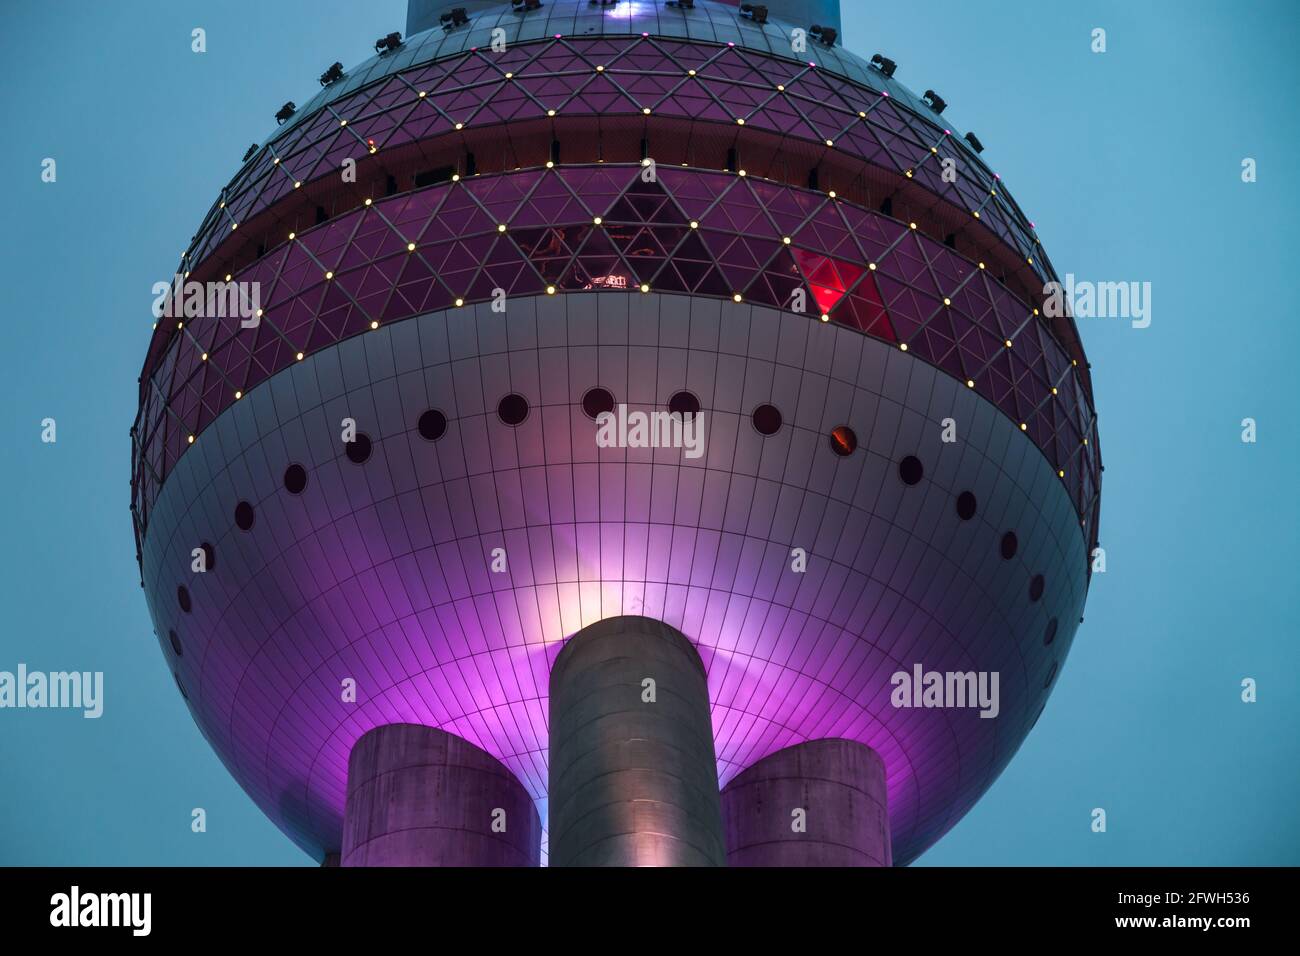 Detail of the Oriental Pearl TV Tower, illuminated in purple lighting during the blue hour, Shanghai, PRC Stock Photo